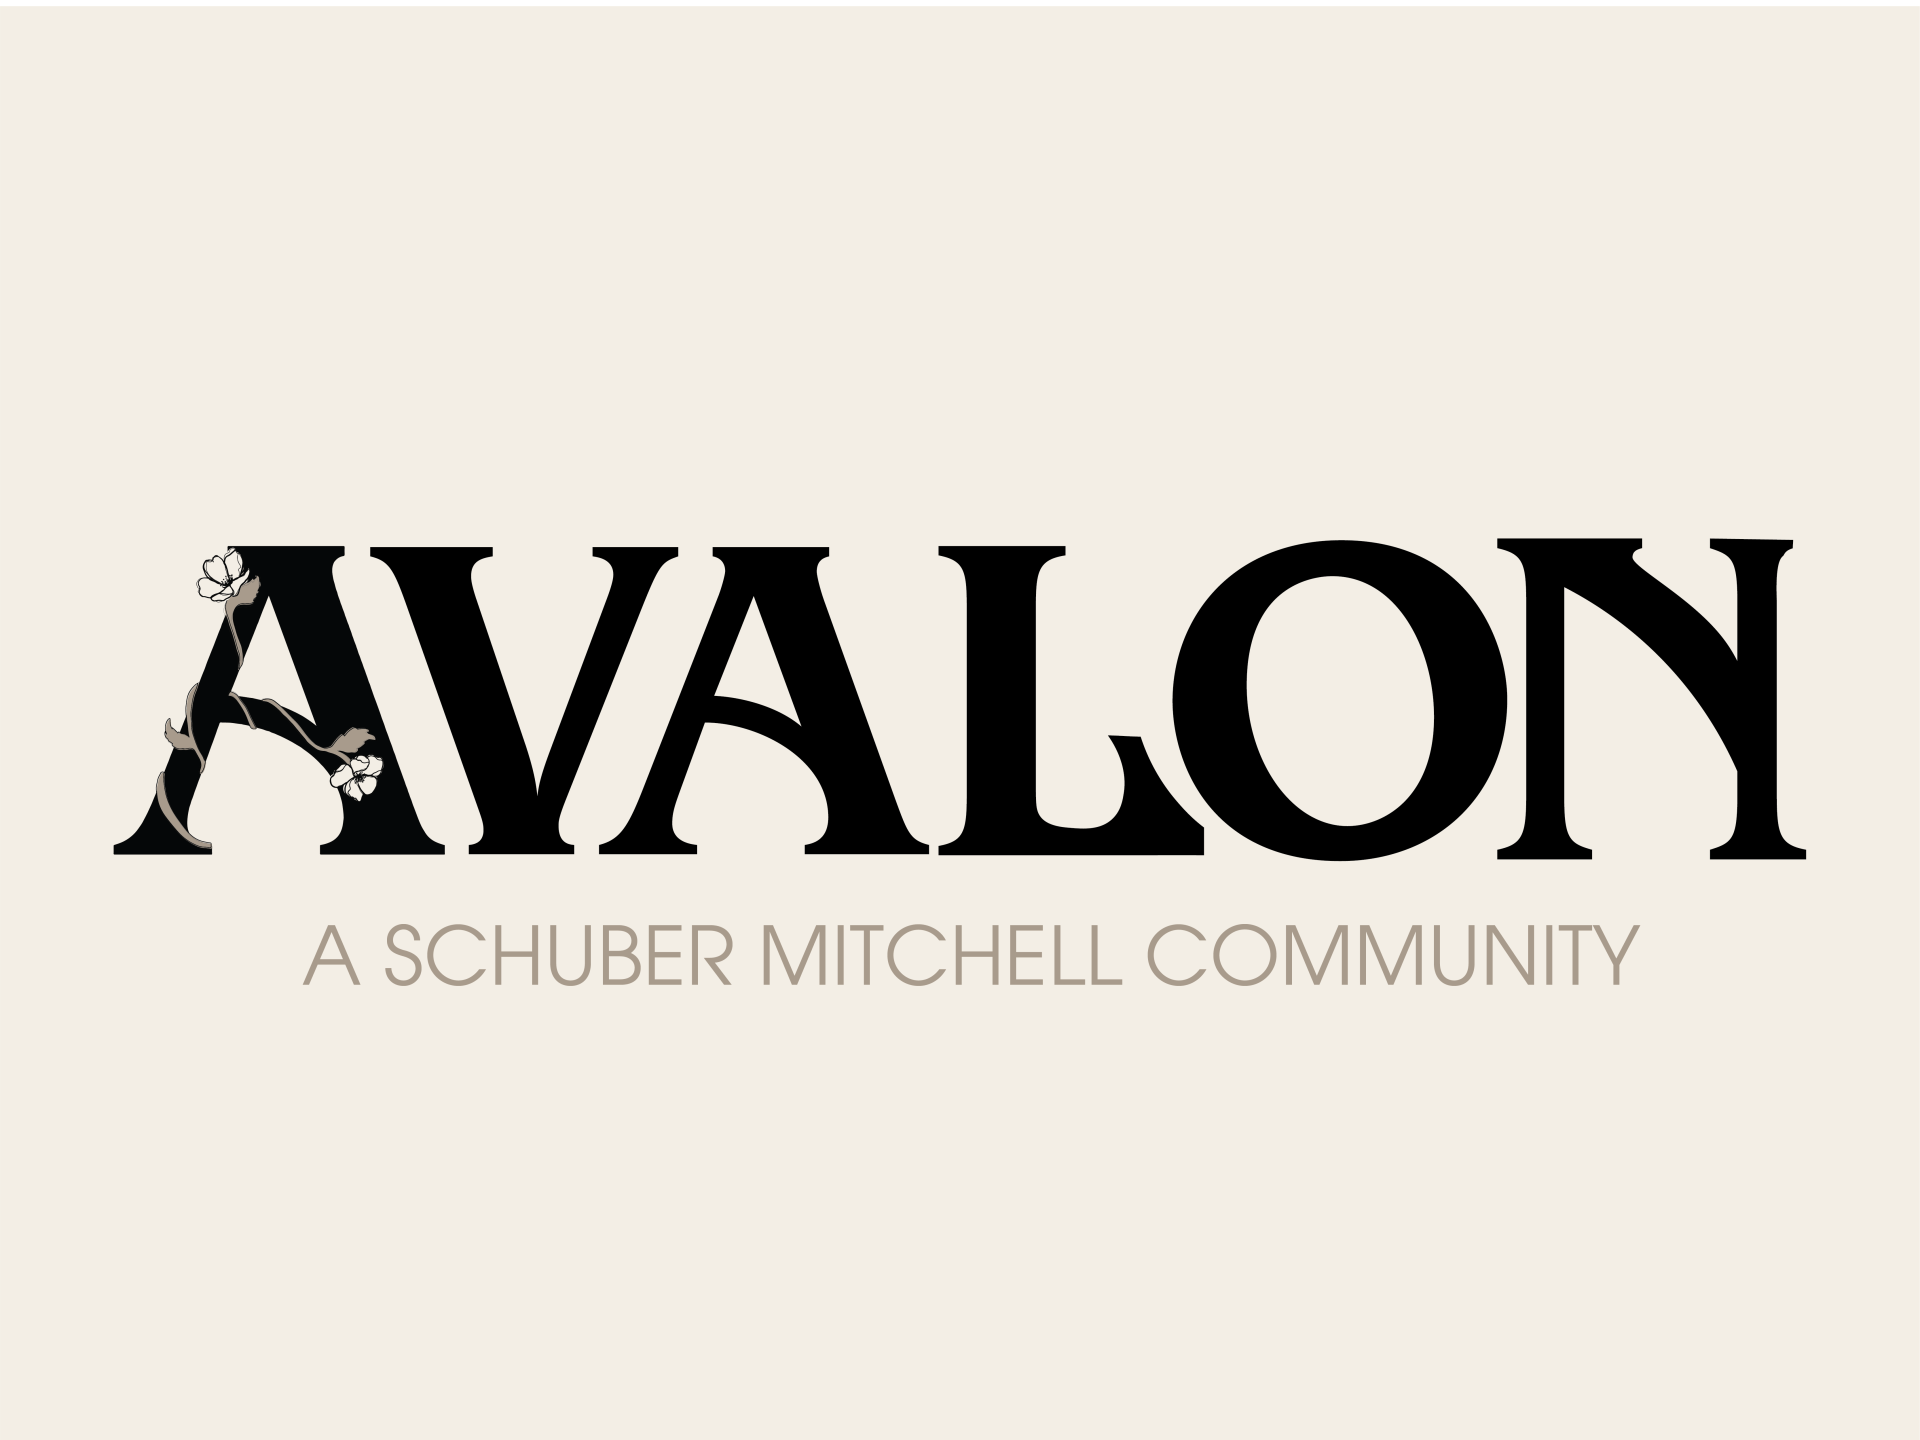 Introducing our Newest Pea Ridge Community: Avalon